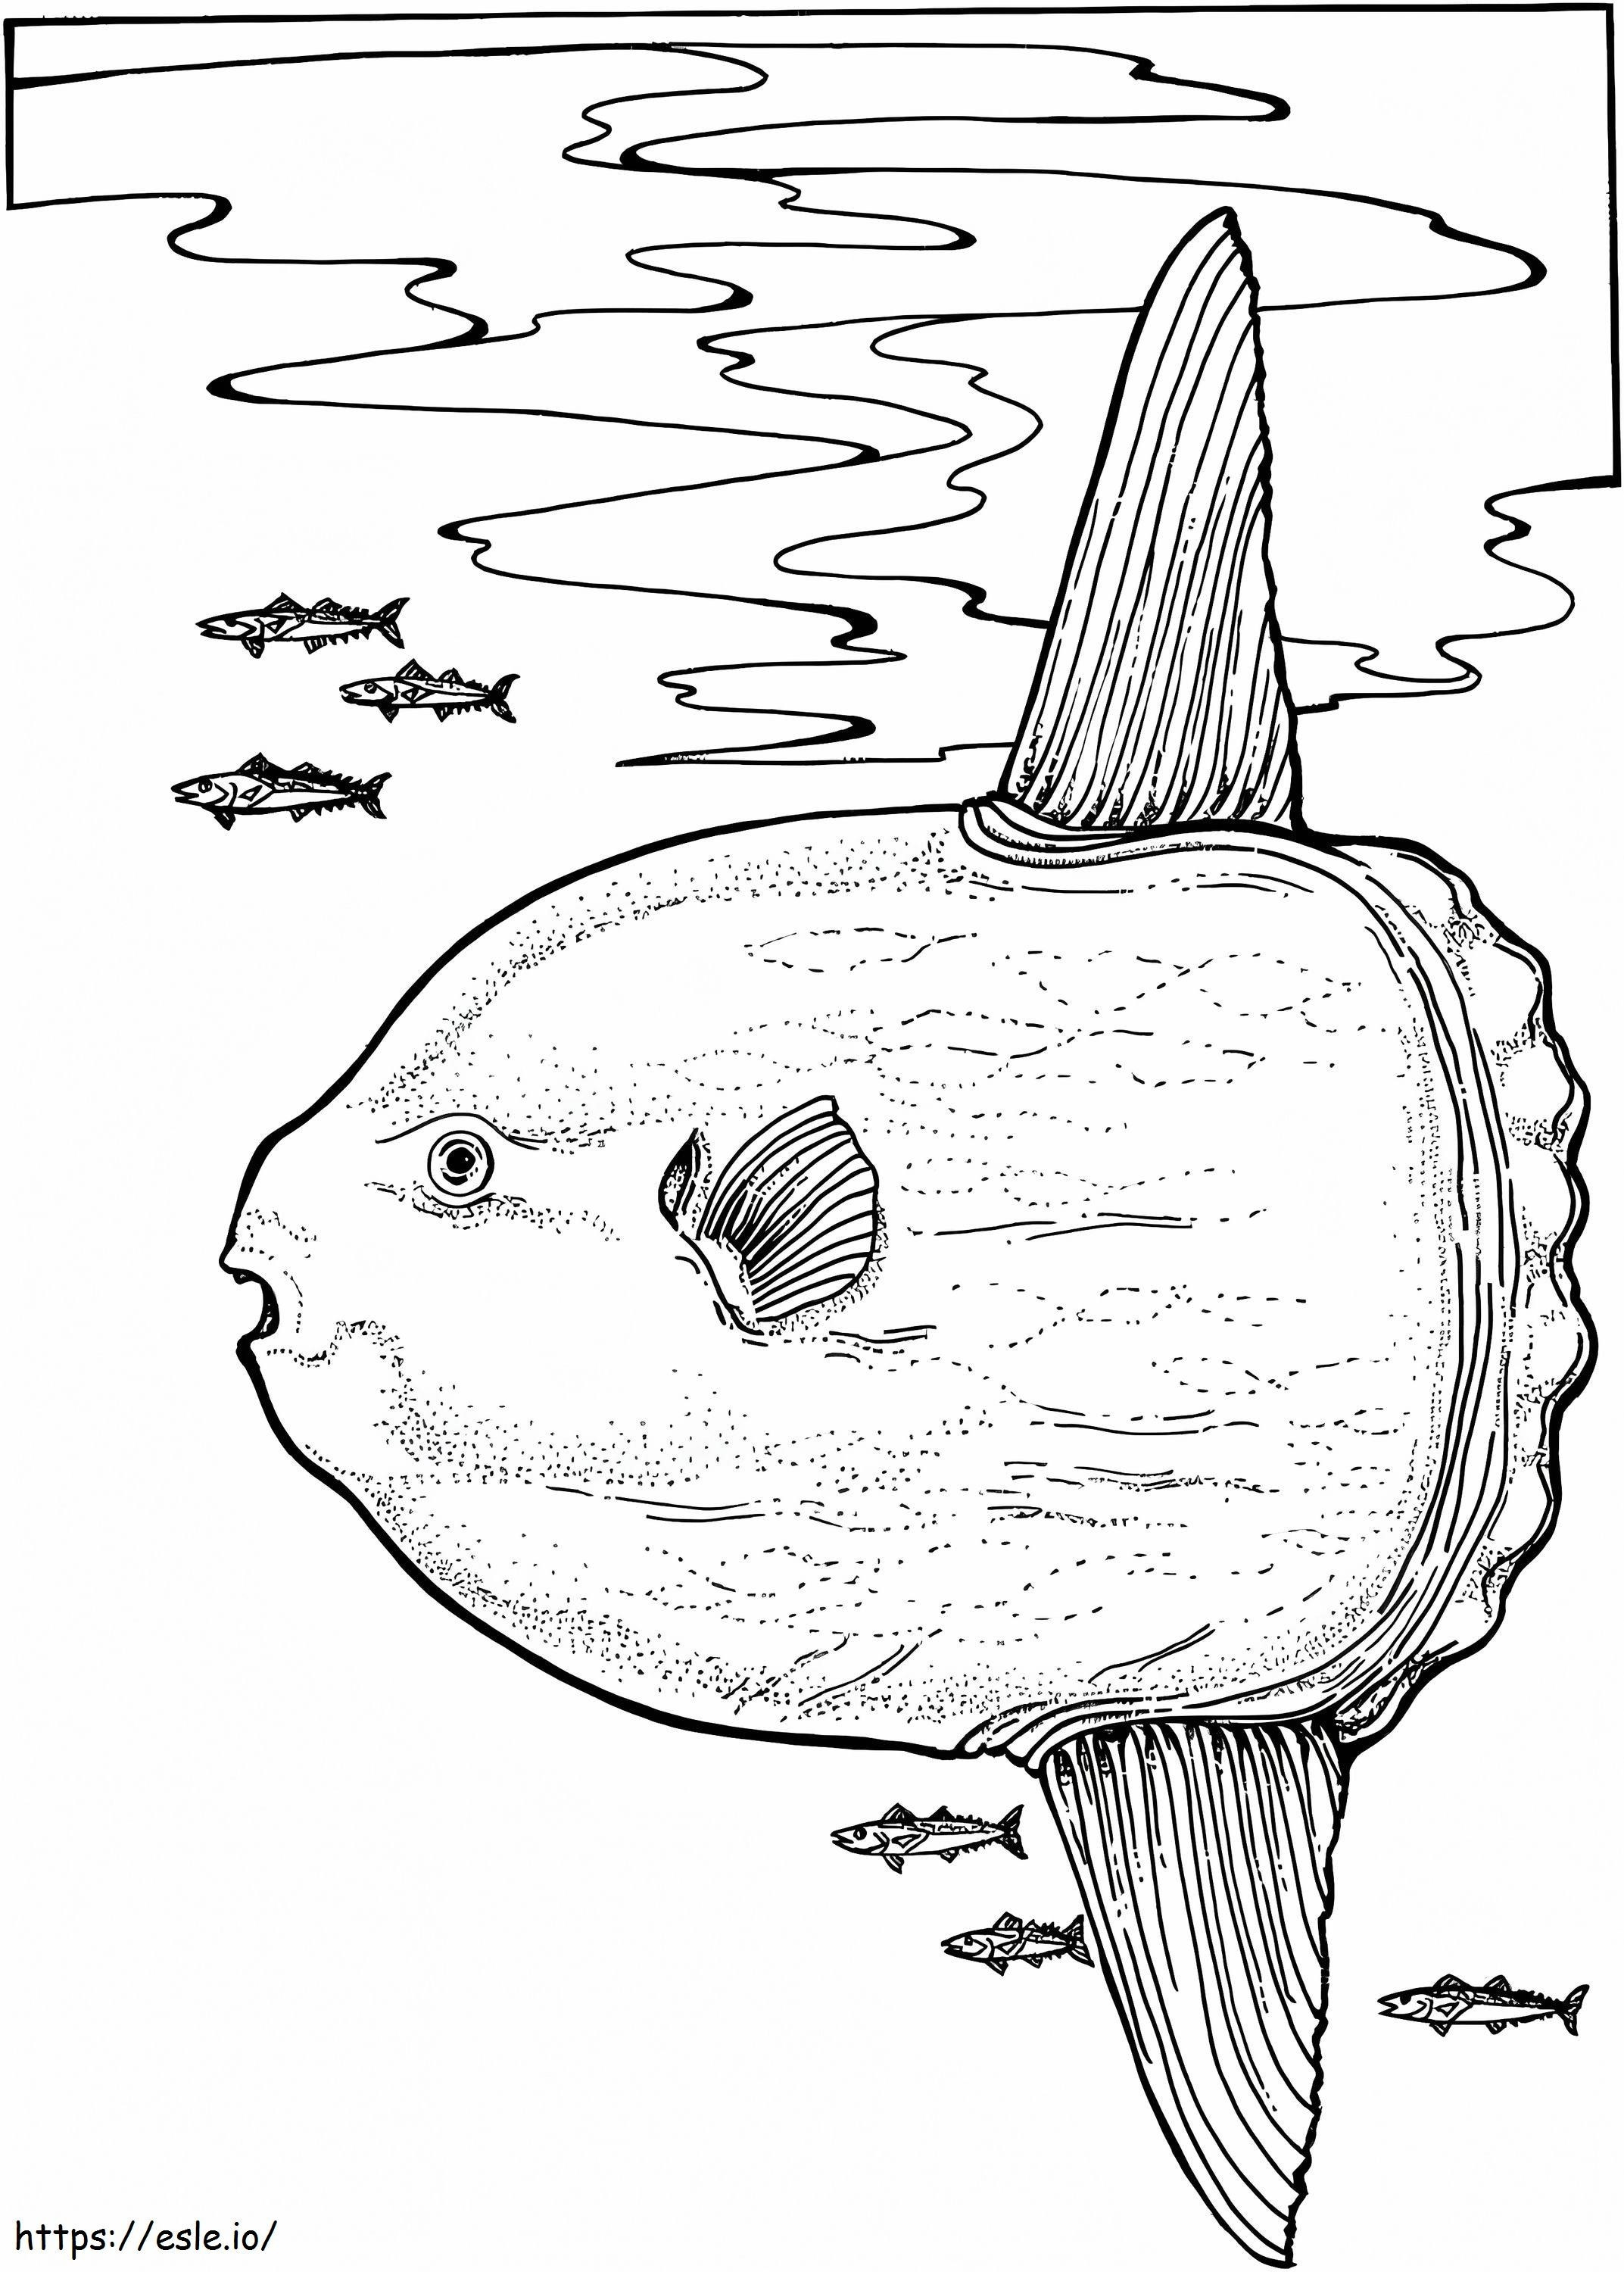 Ocean Sunfish coloring page